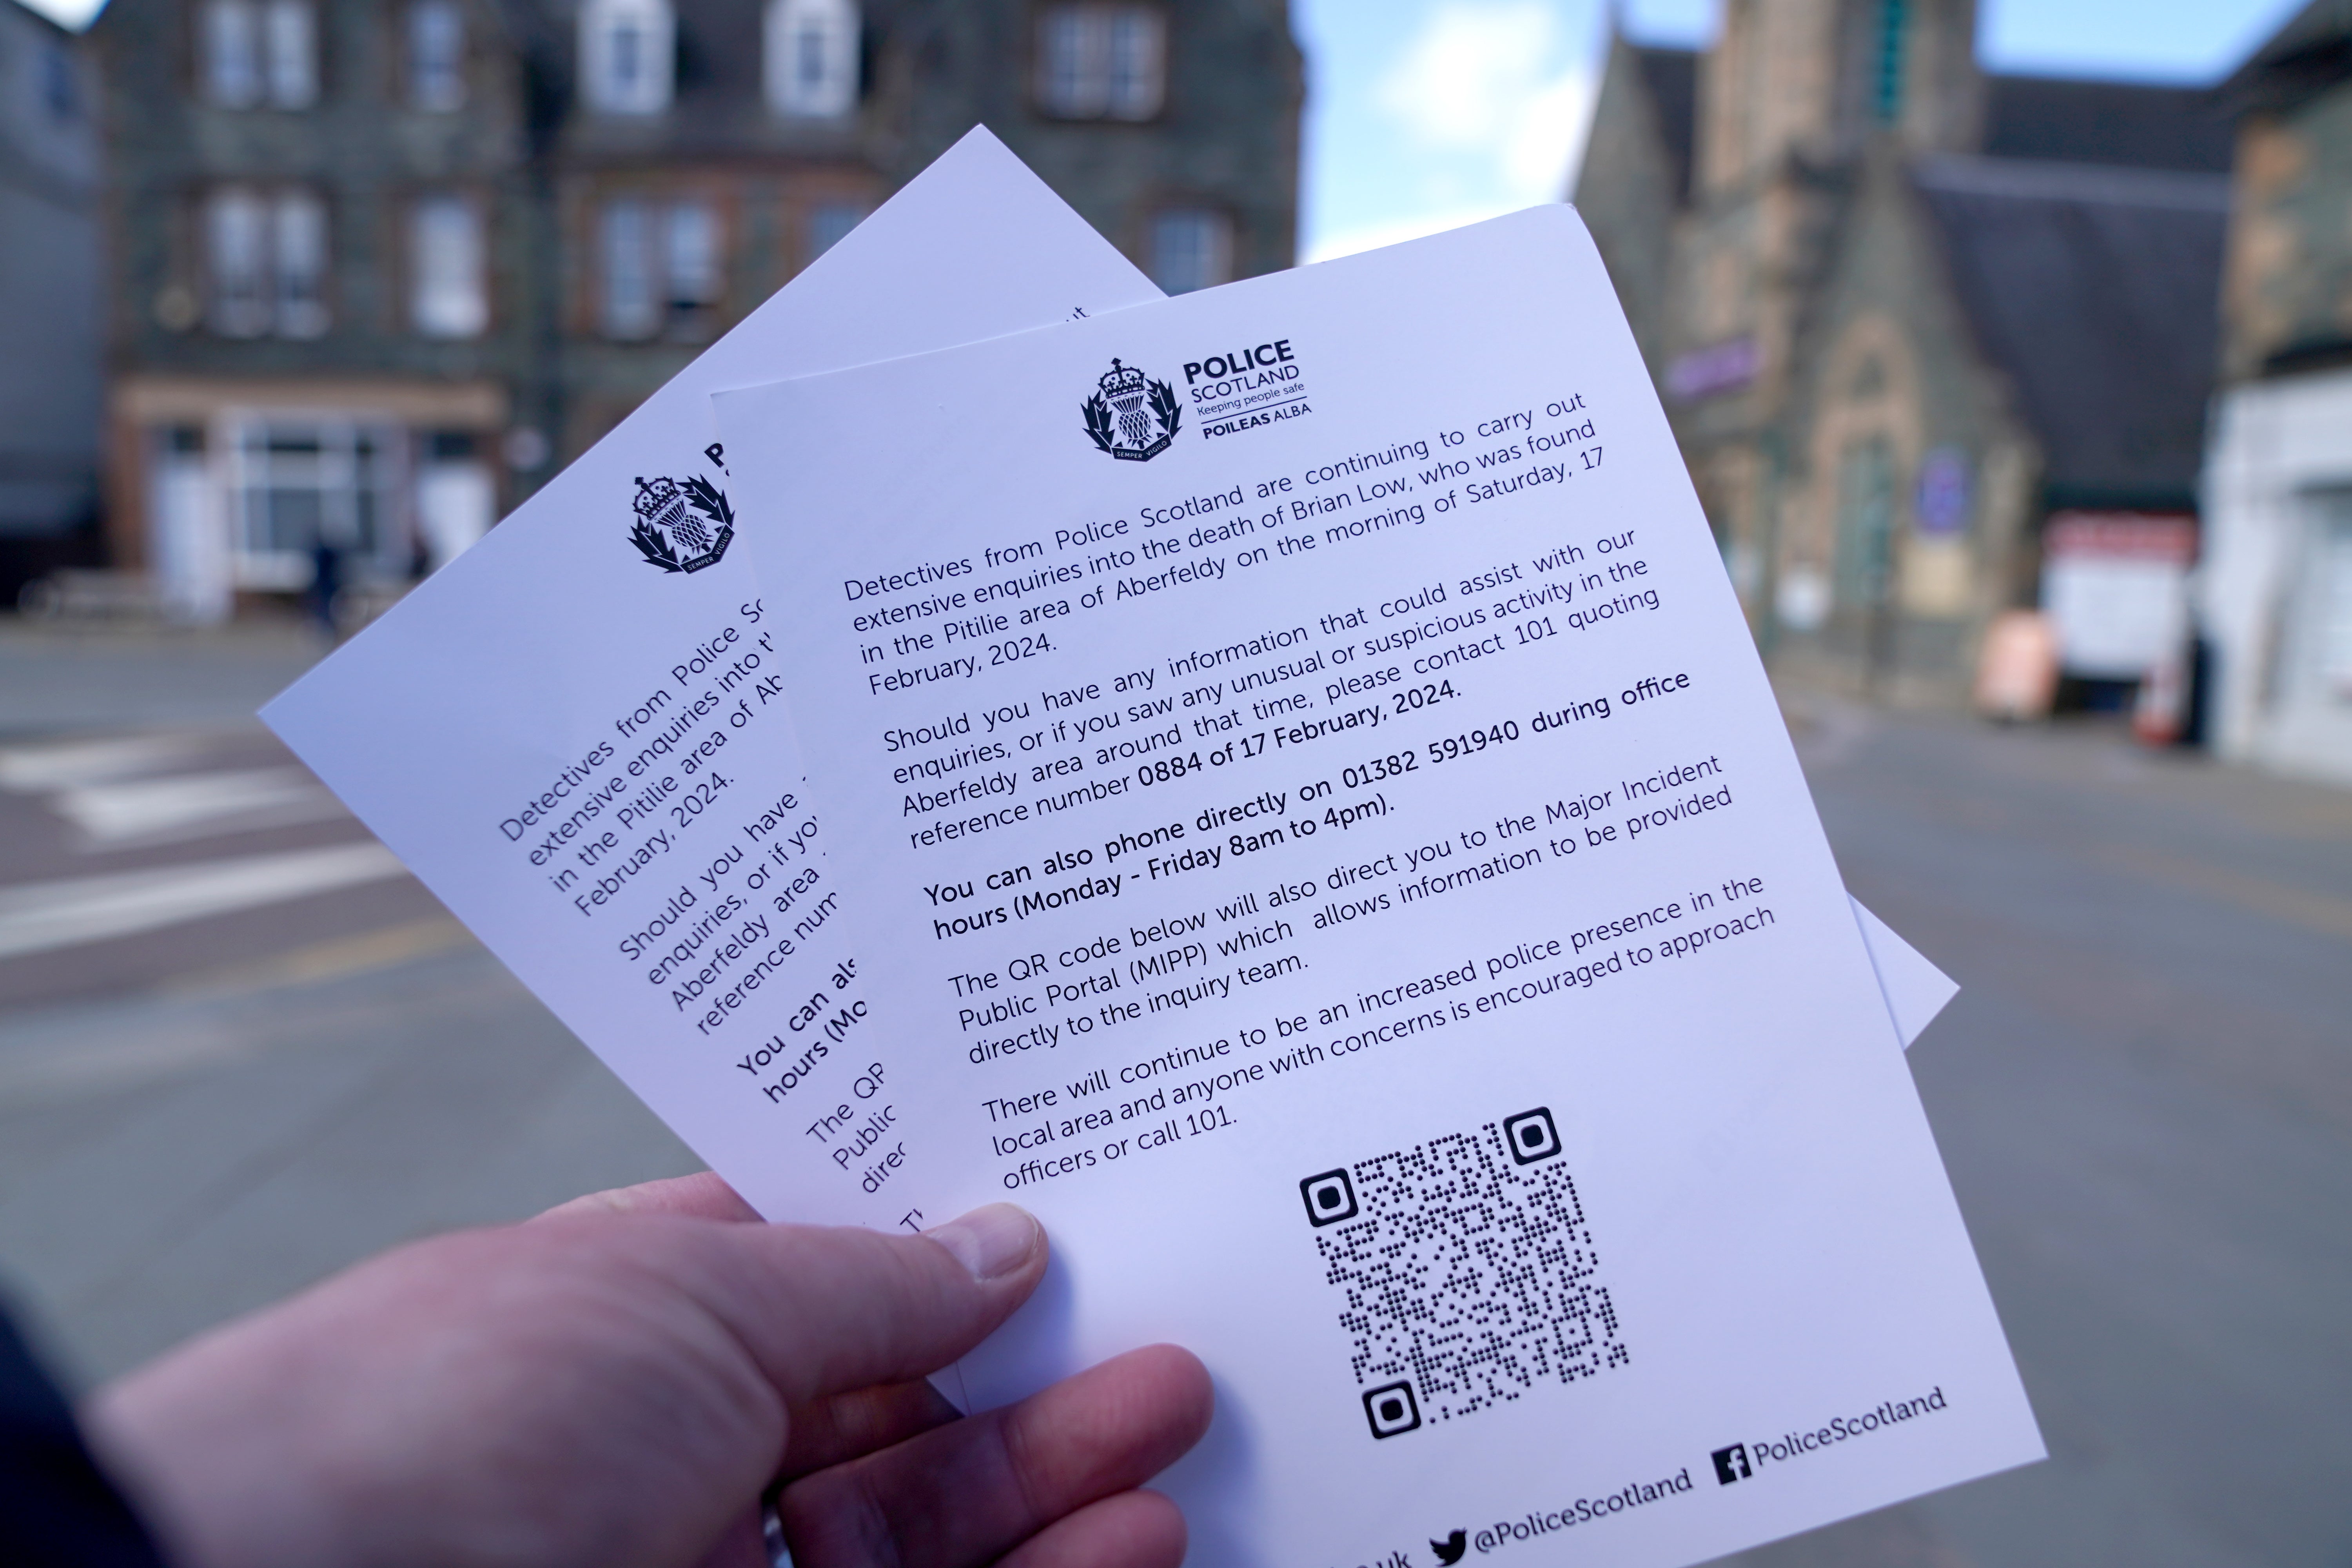 Appeal leaflets are held as police officers make door-to-door enquiries in Aberfeldy, Perth and Kinross